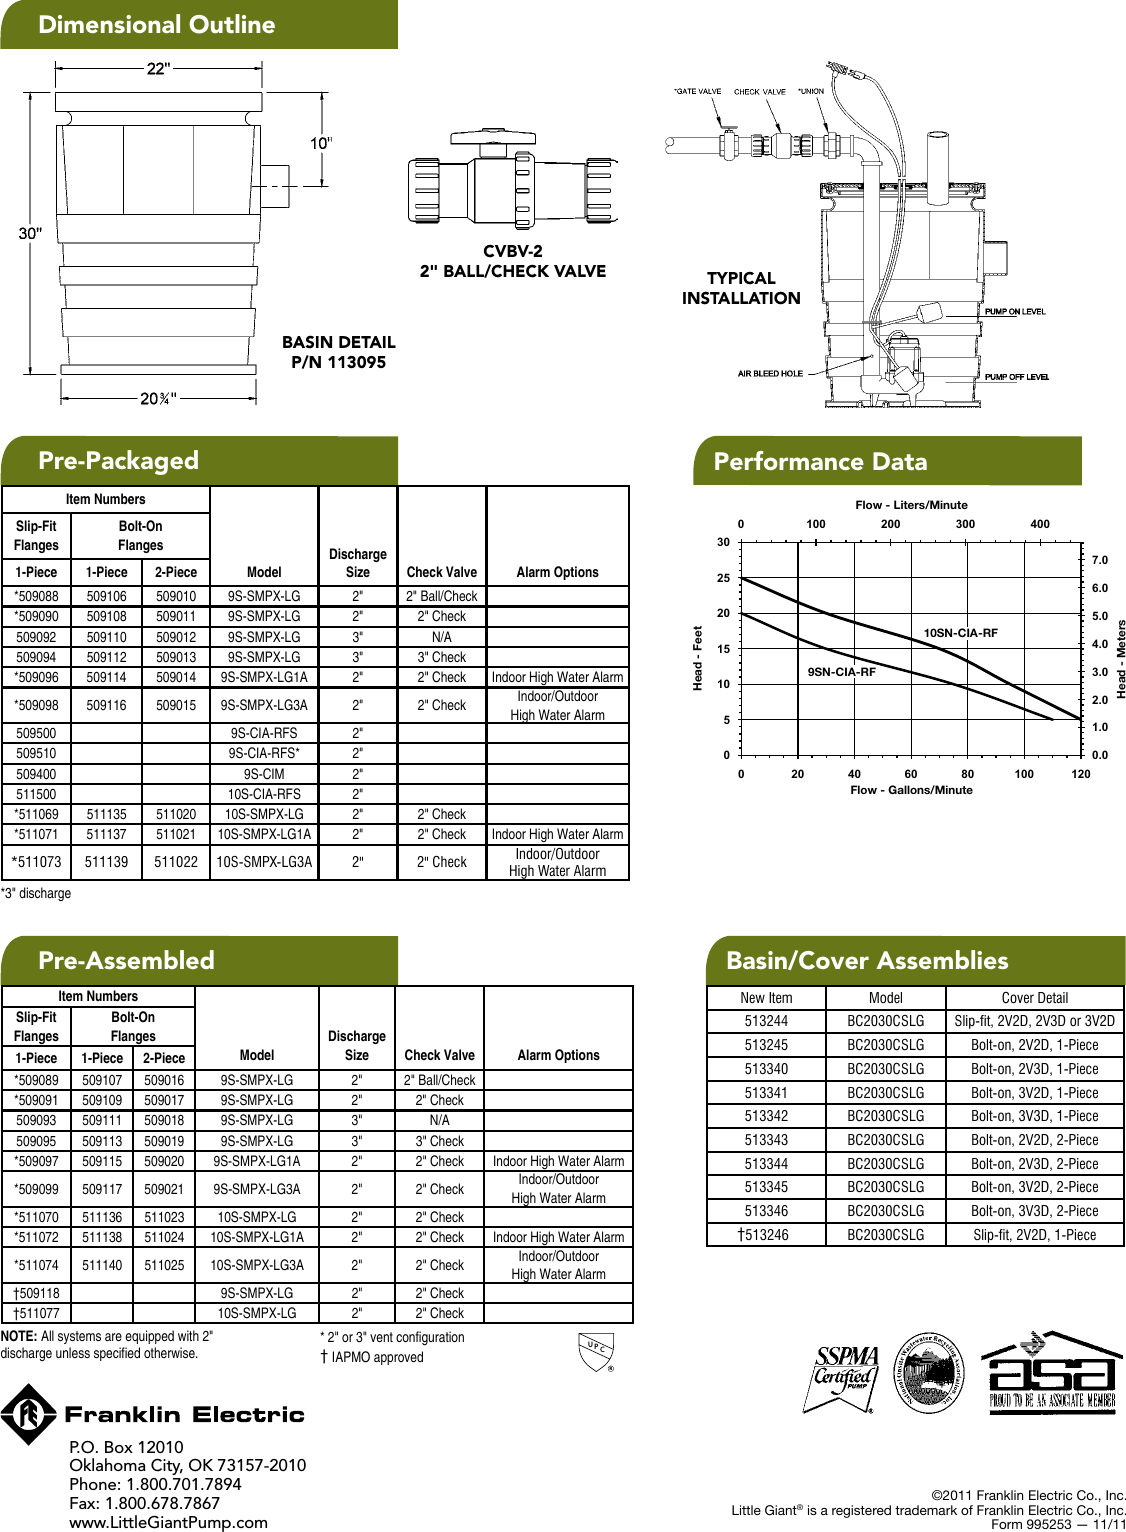 Page 2 of 2 - 18100 2 Little Giant 9S Submittal User Manual